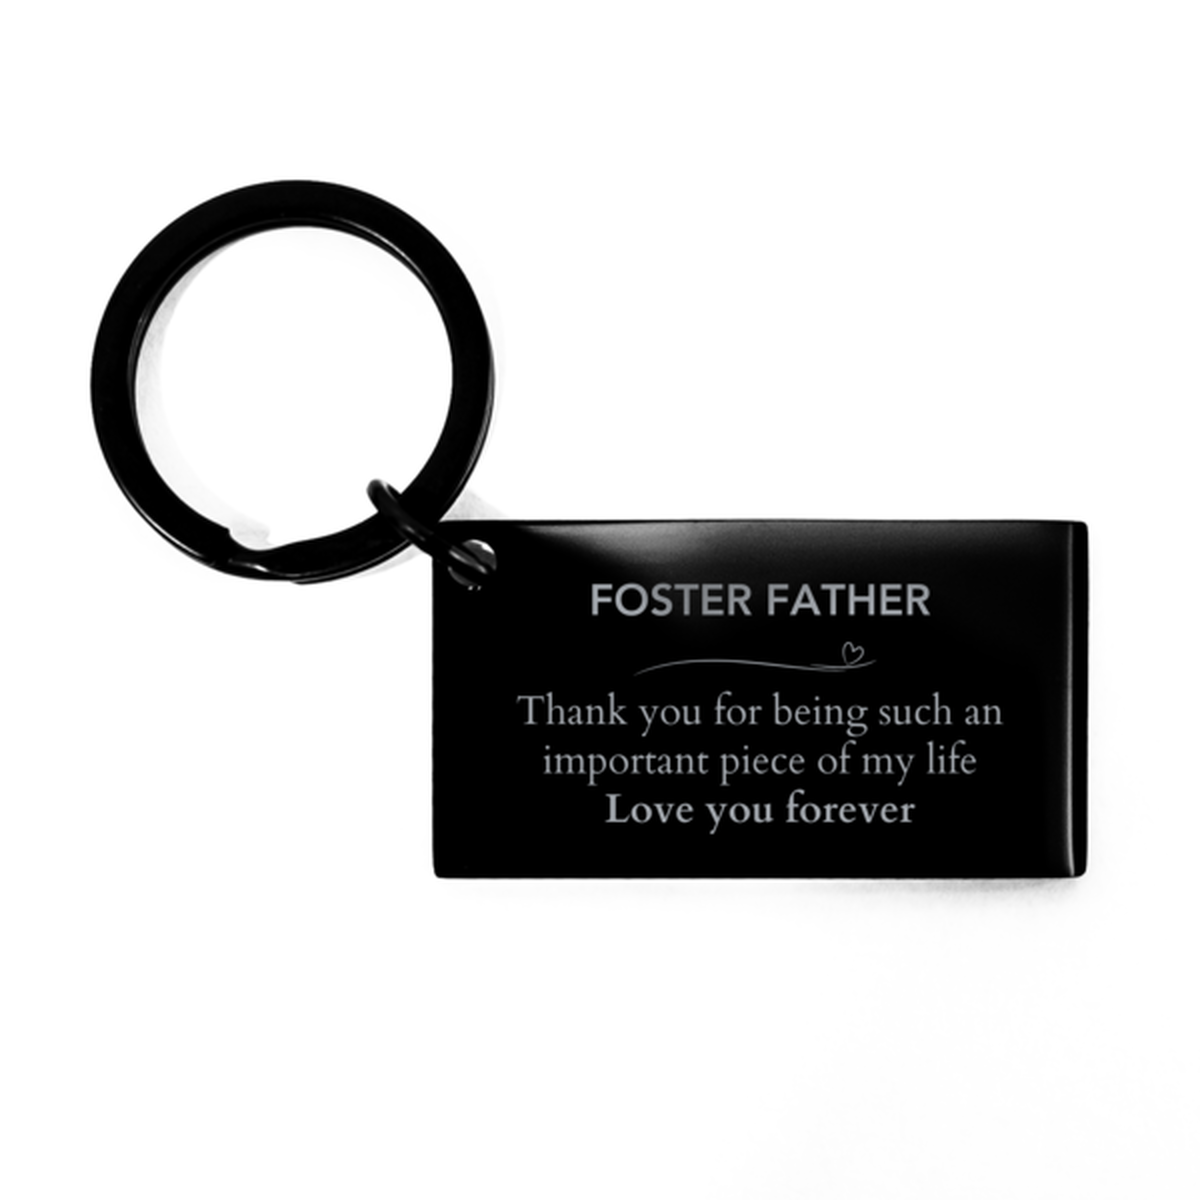 Appropriate Foster Father Keychain Epic Birthday Gifts for Foster Father Thank you for being such an important piece of my life Foster Father Christmas Mothers Fathers Day